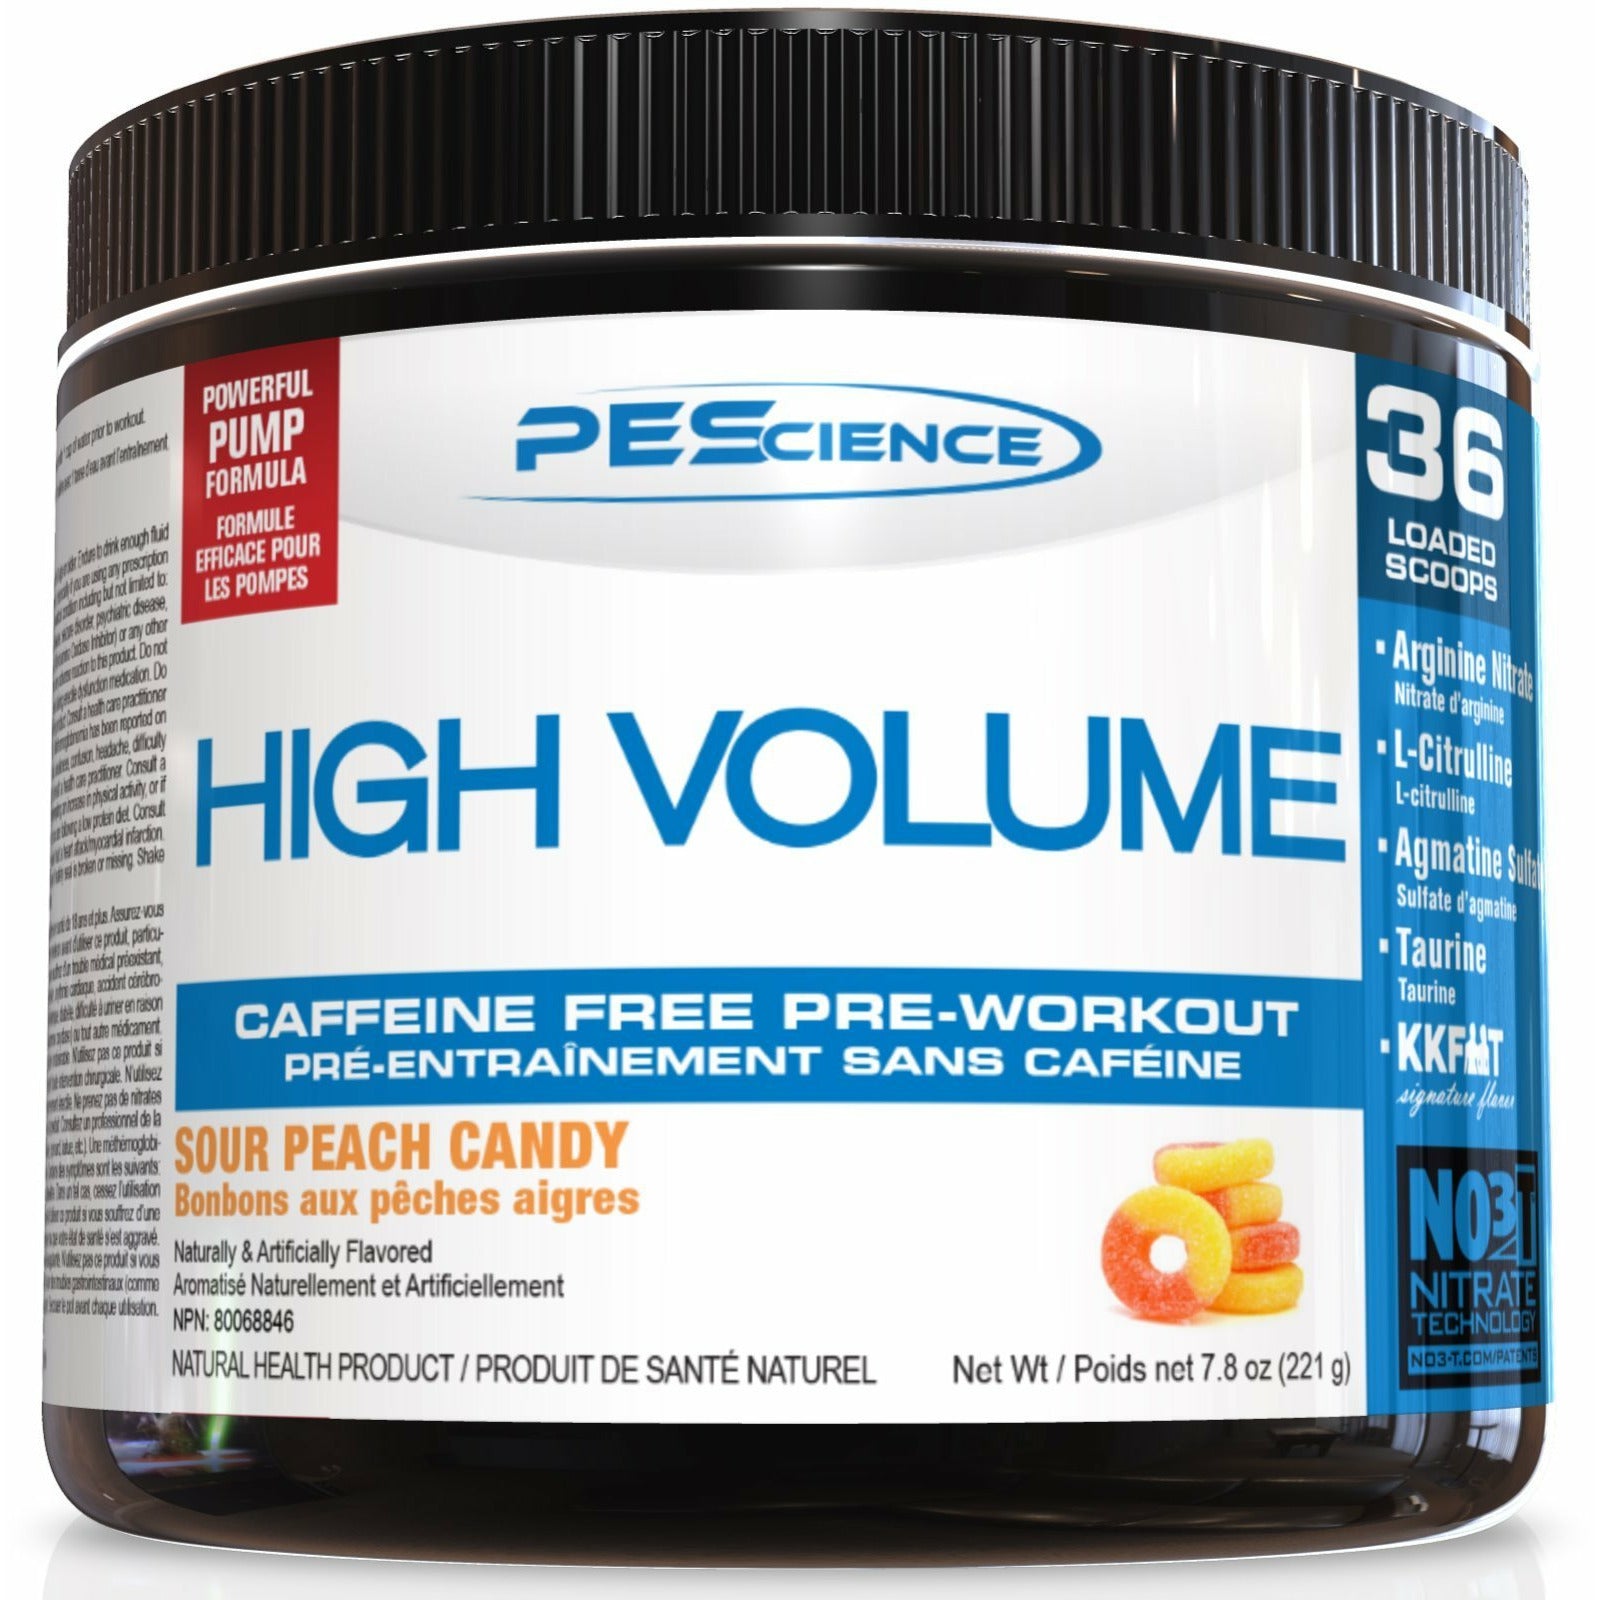 PEScience High Volume Stim-Free Pre-Workout (36 servings) Pre-workout Sour Peach Candy PEScience